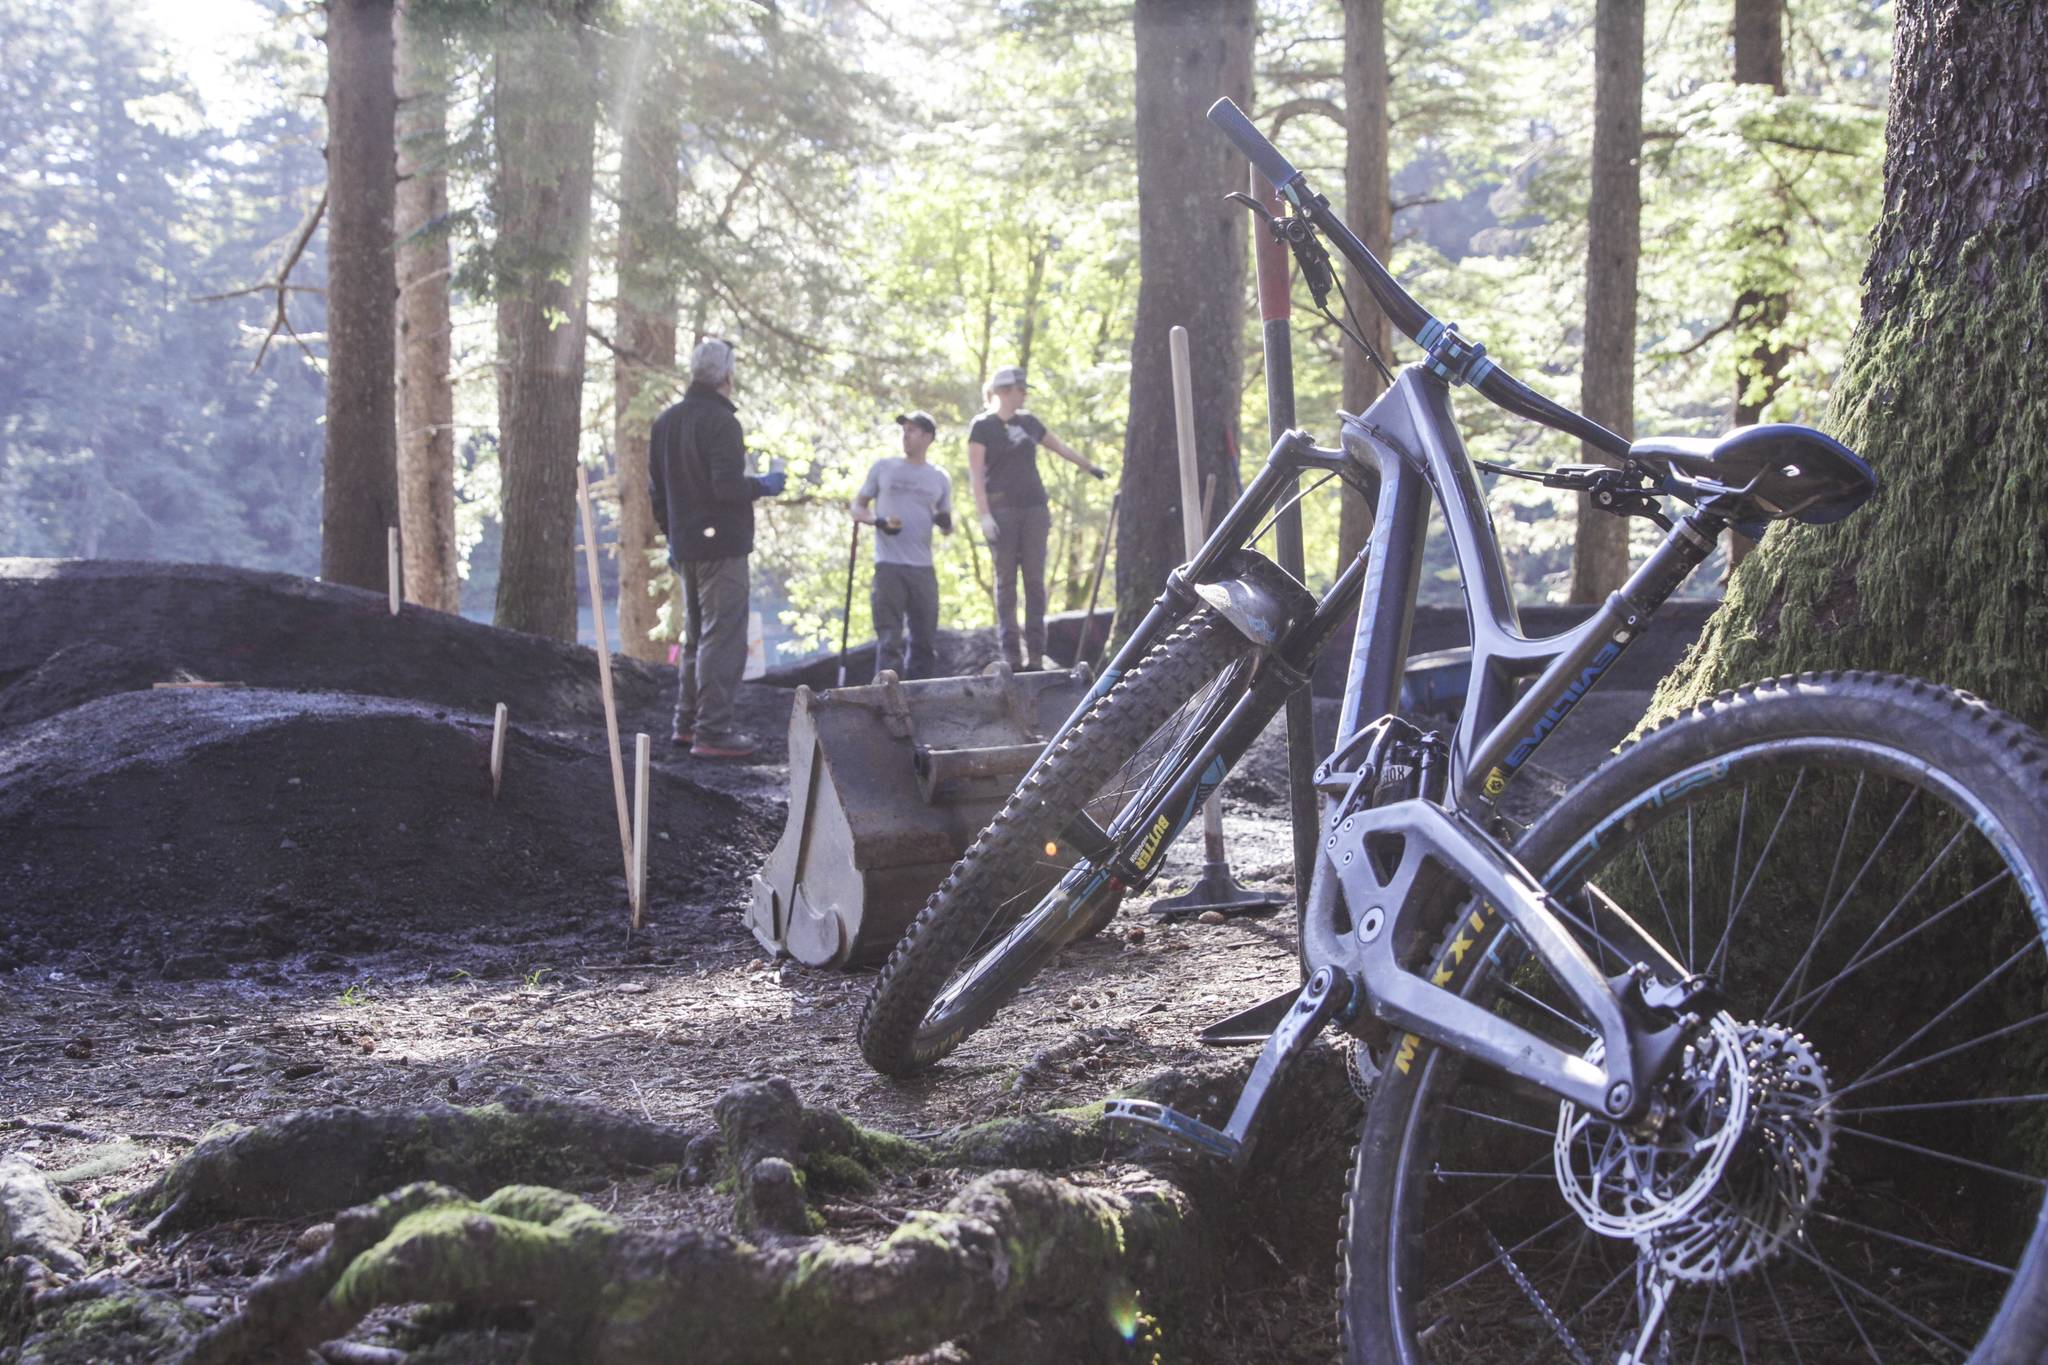 The Juneau Mountain Bike Alliance and City and Borough of Juneau are collaborating to finish a new pump track for bicycle riders in Cope Park, due to be finished within weeks, Sept. 16, 2020. (Michael S. Lockett / Juneau Empire)